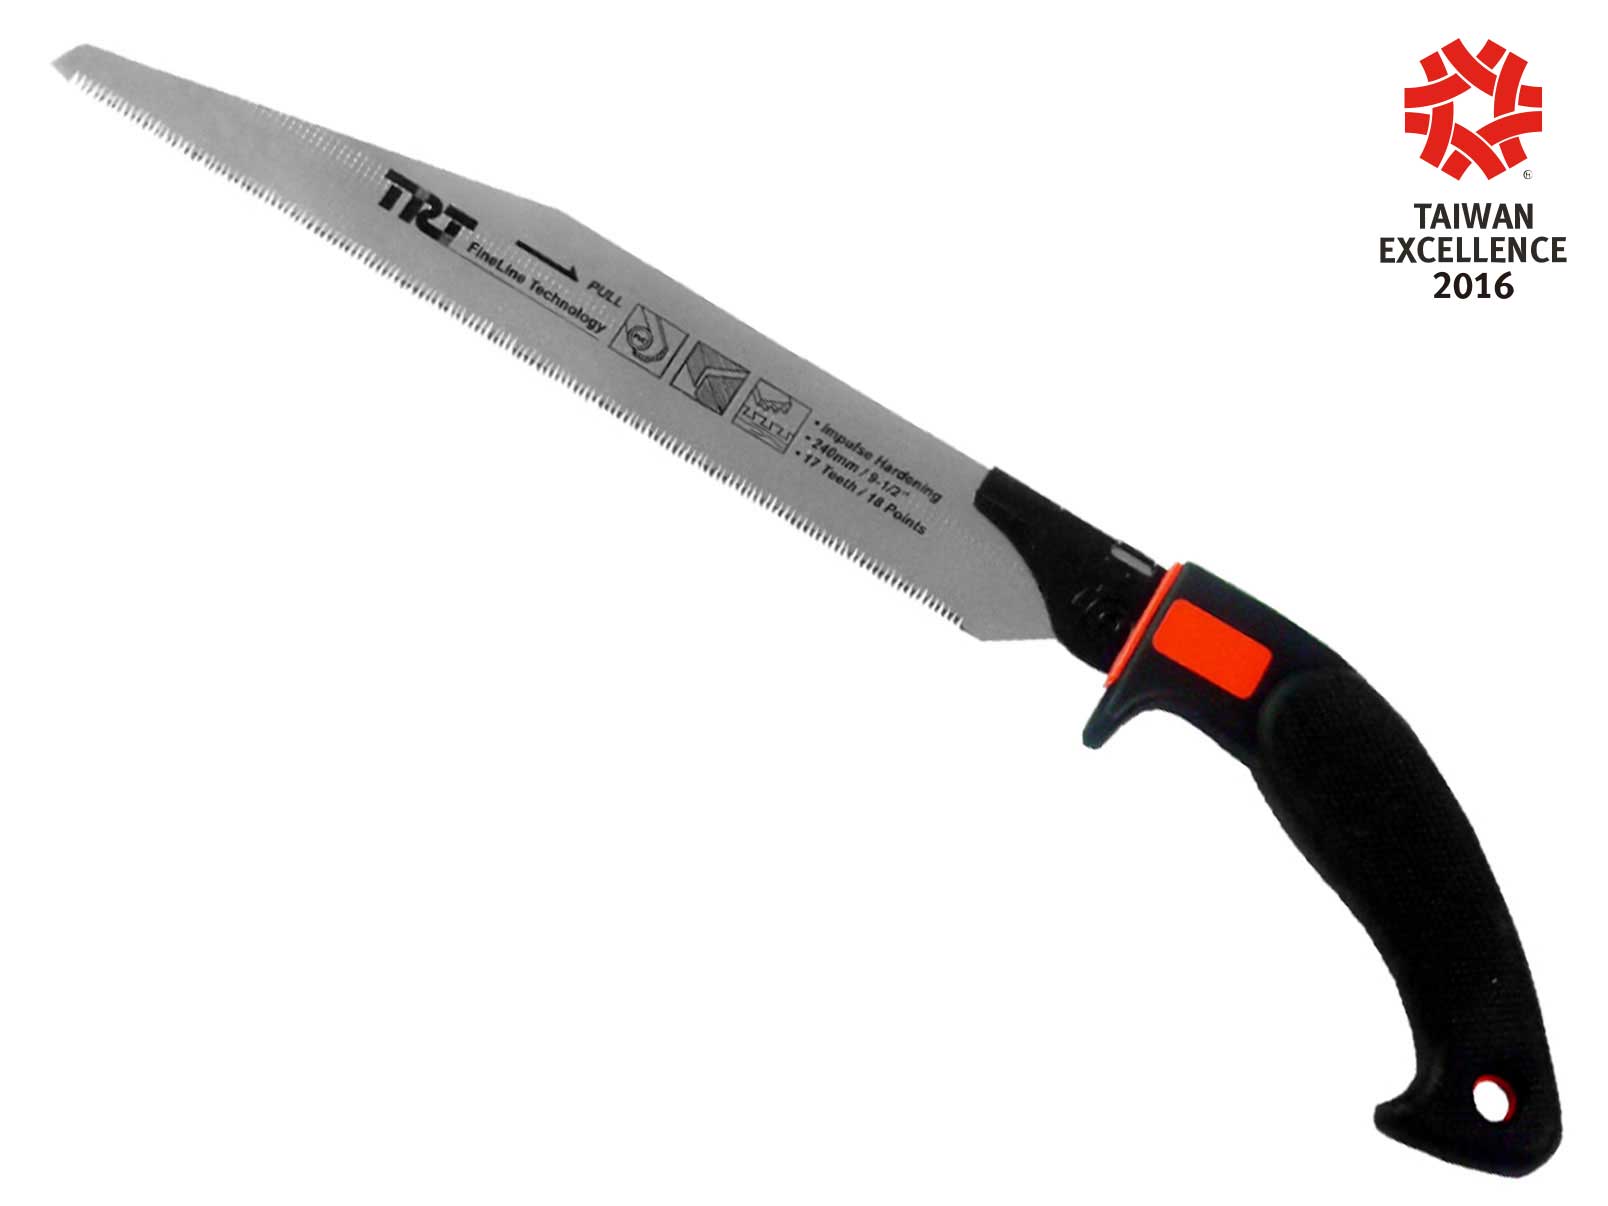 2016 Taiwan Excellence Award TRT Pruning Saw